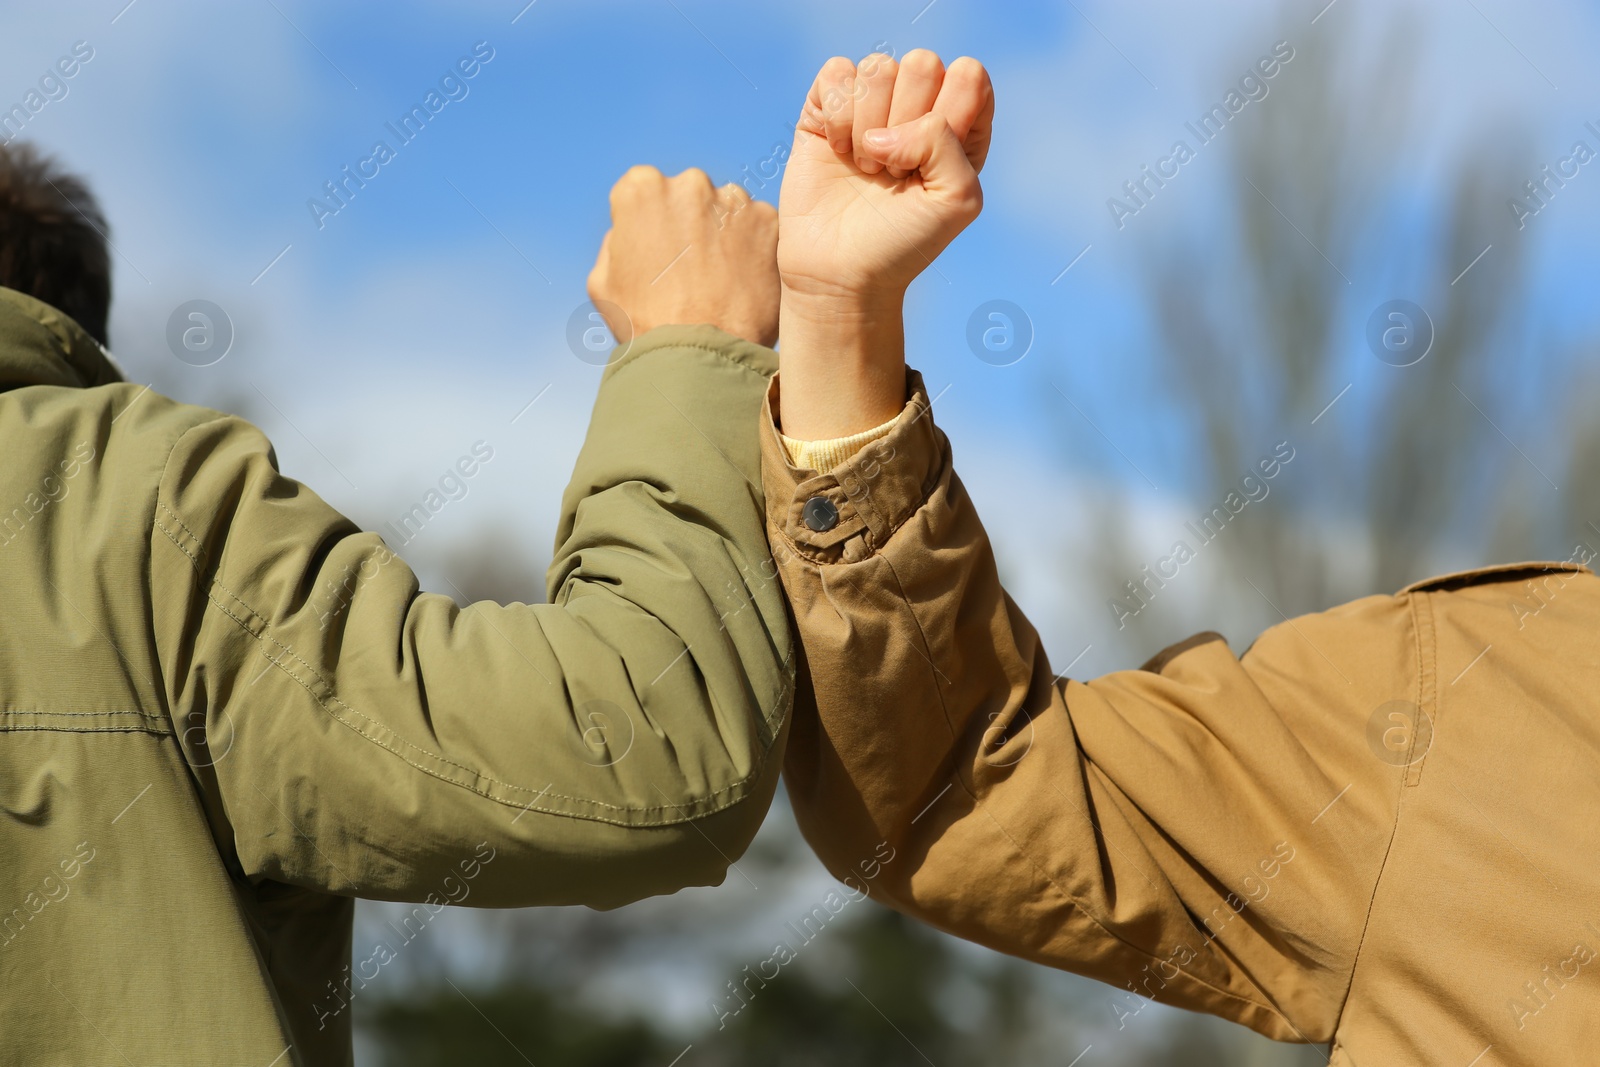 Photo of People greeting each other by bumping elbows instead of handshake outdoors, closeup